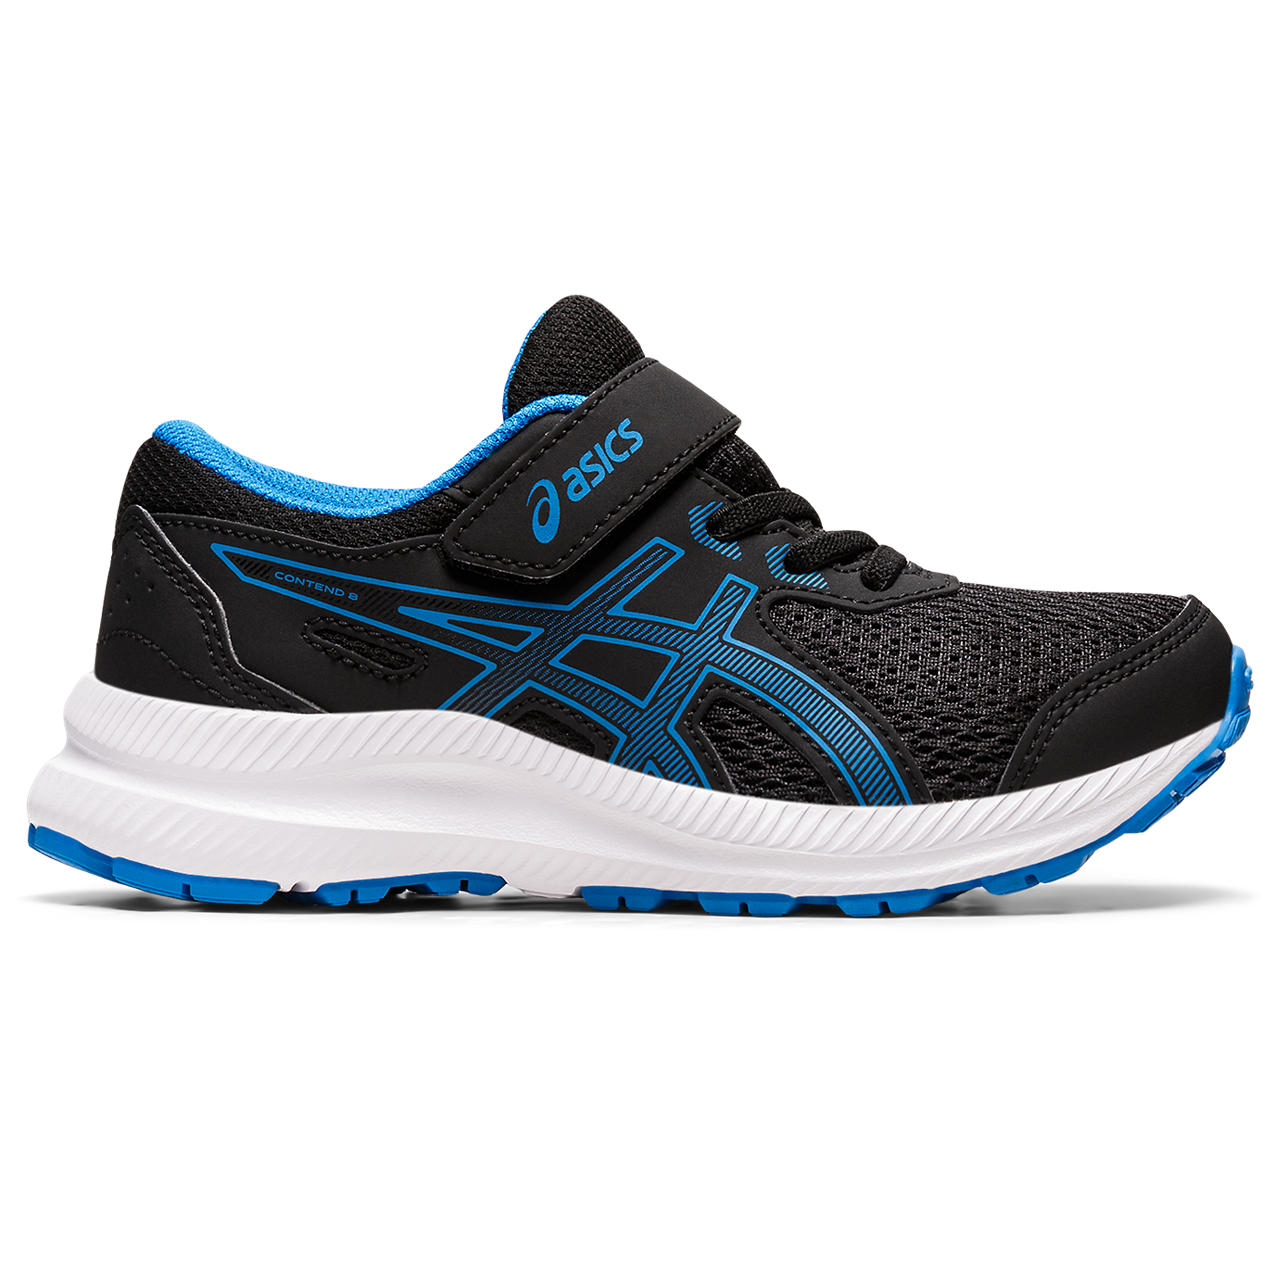 ASICS CONTEND 8 PS, BLACK/ELECTRIC BLUE, swatch